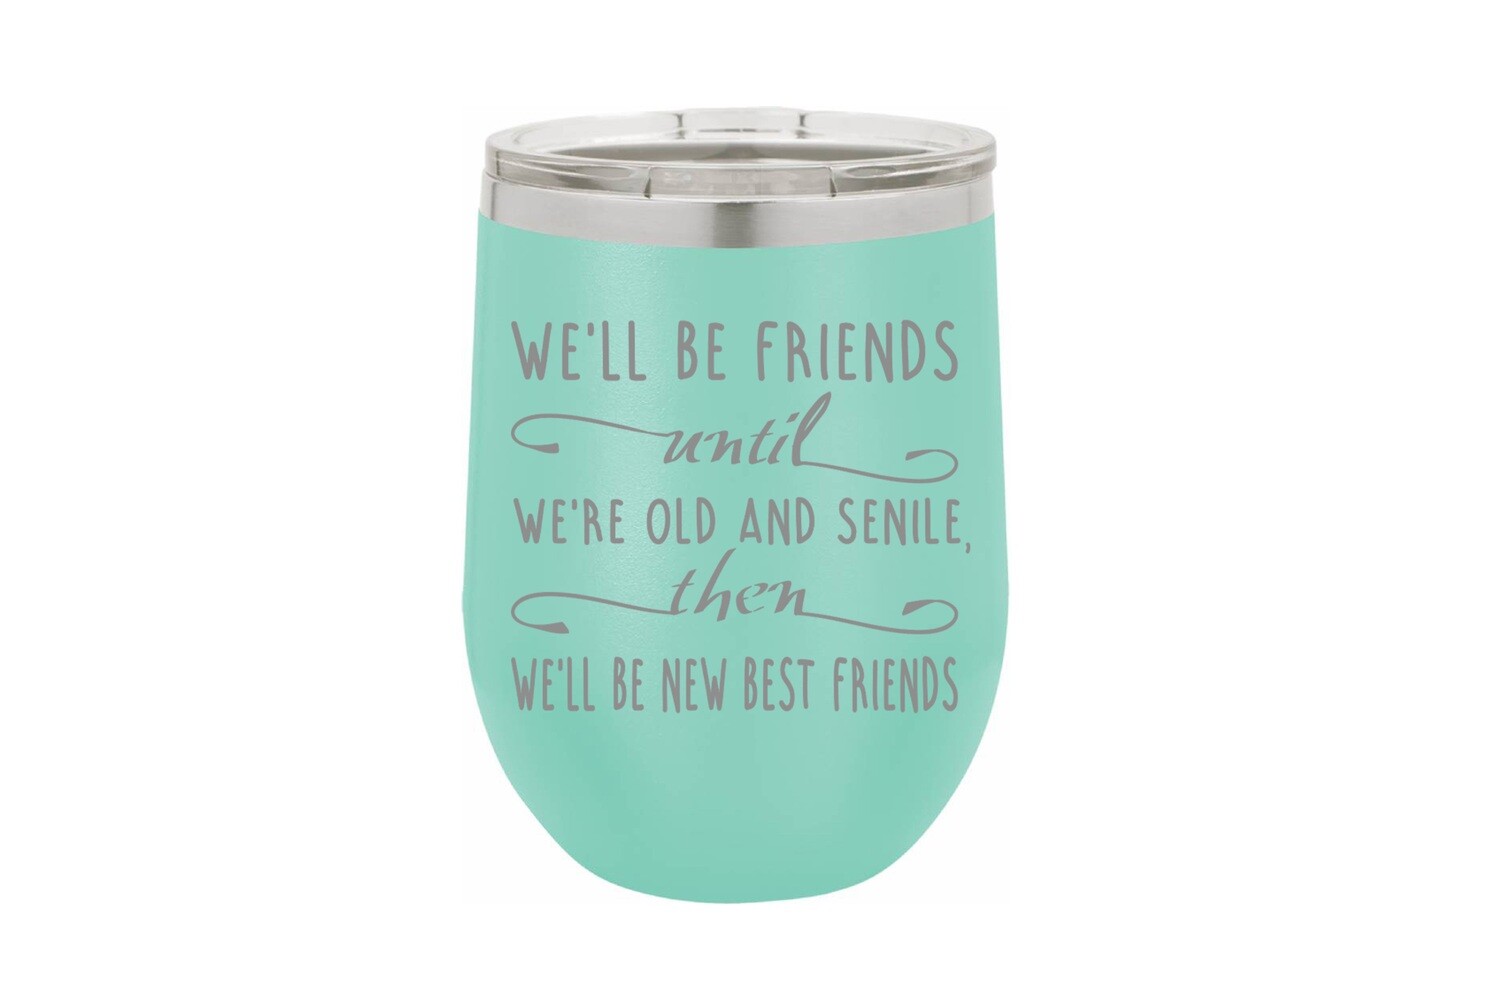 We'll Be Friends until We're Old and Senile, then We'll be New Best Friends Insulated Tumbler 12 oz